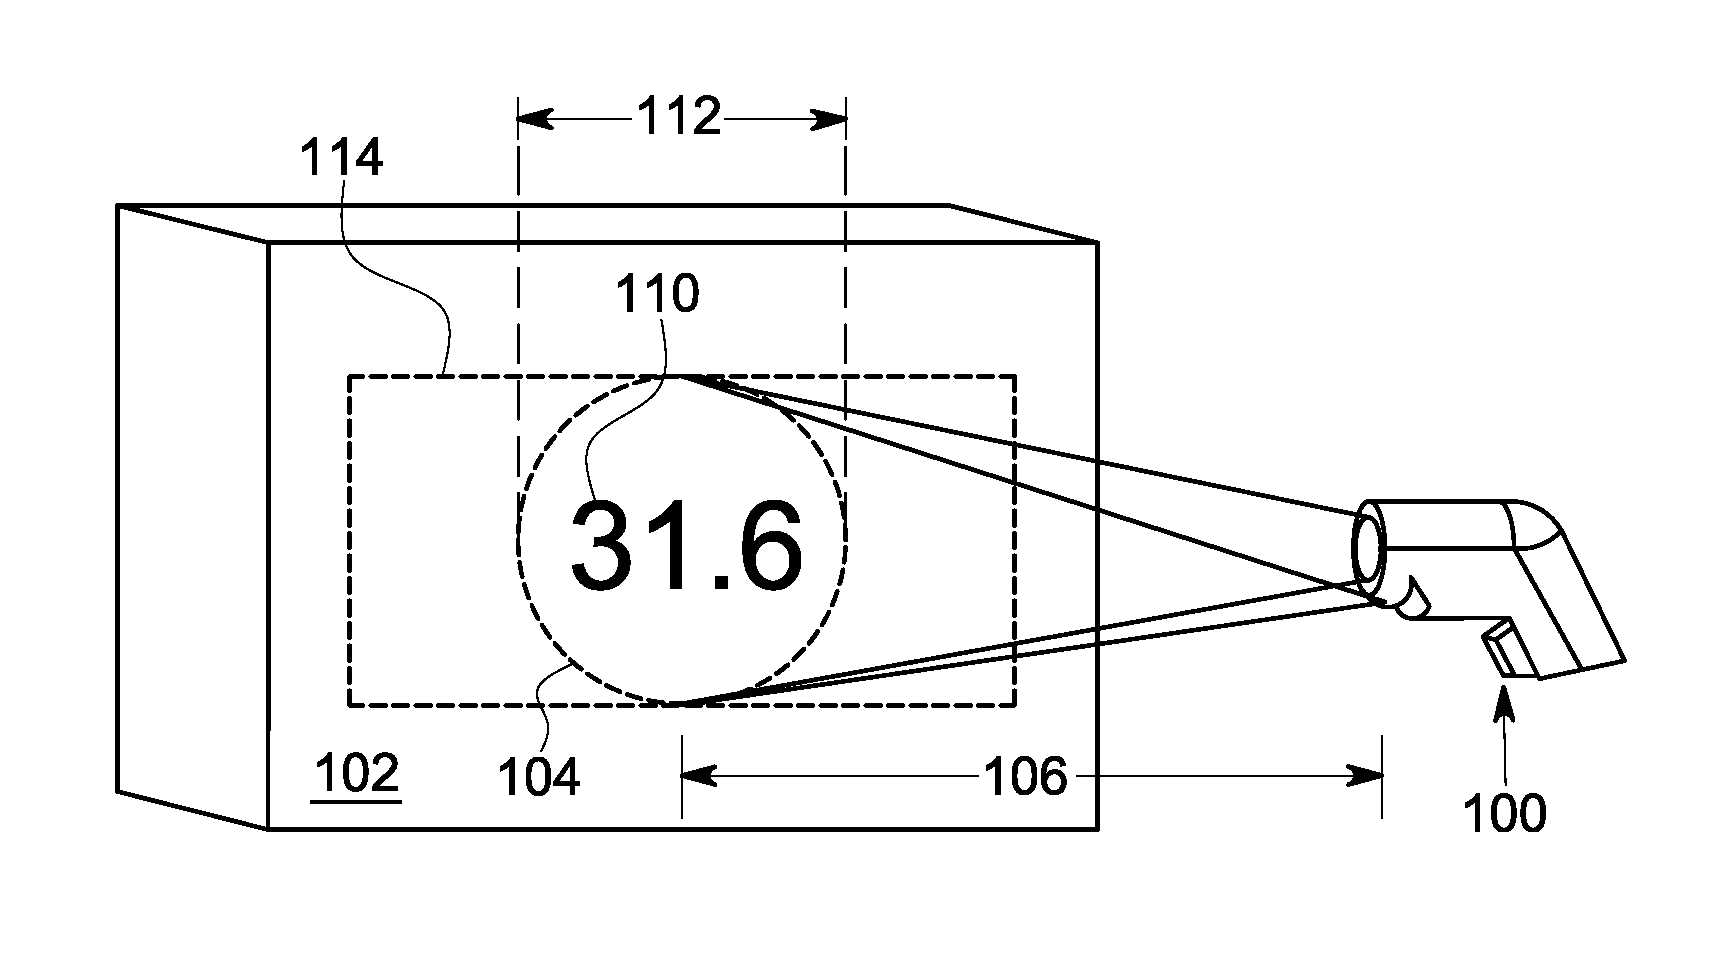 Method and apparatus for displaying the temperature of an object